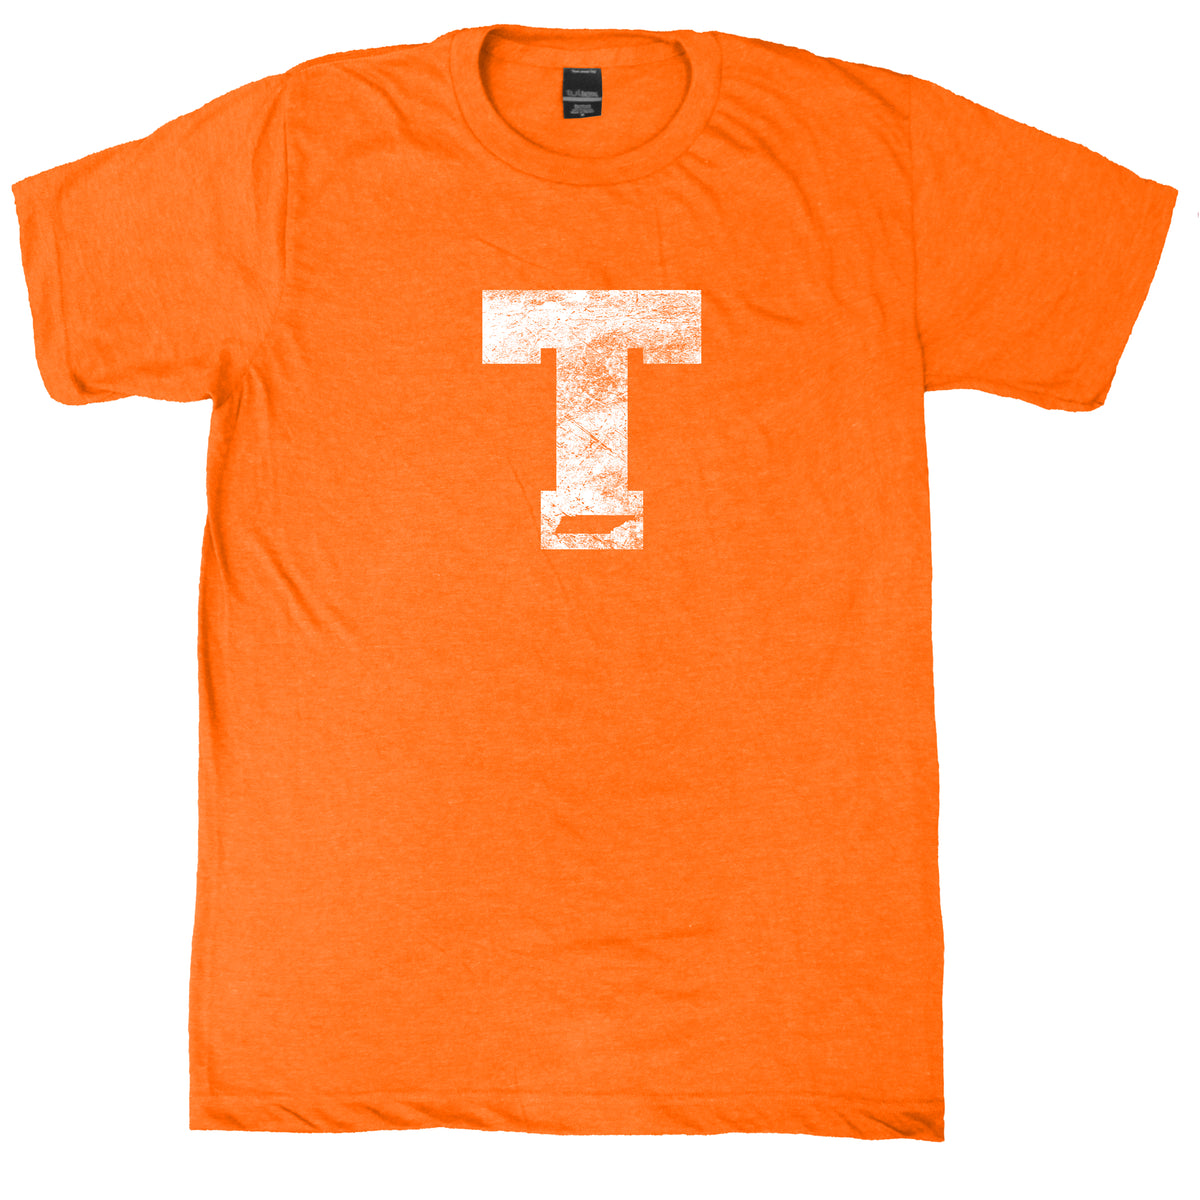 Tennessee Block State T-Shirt